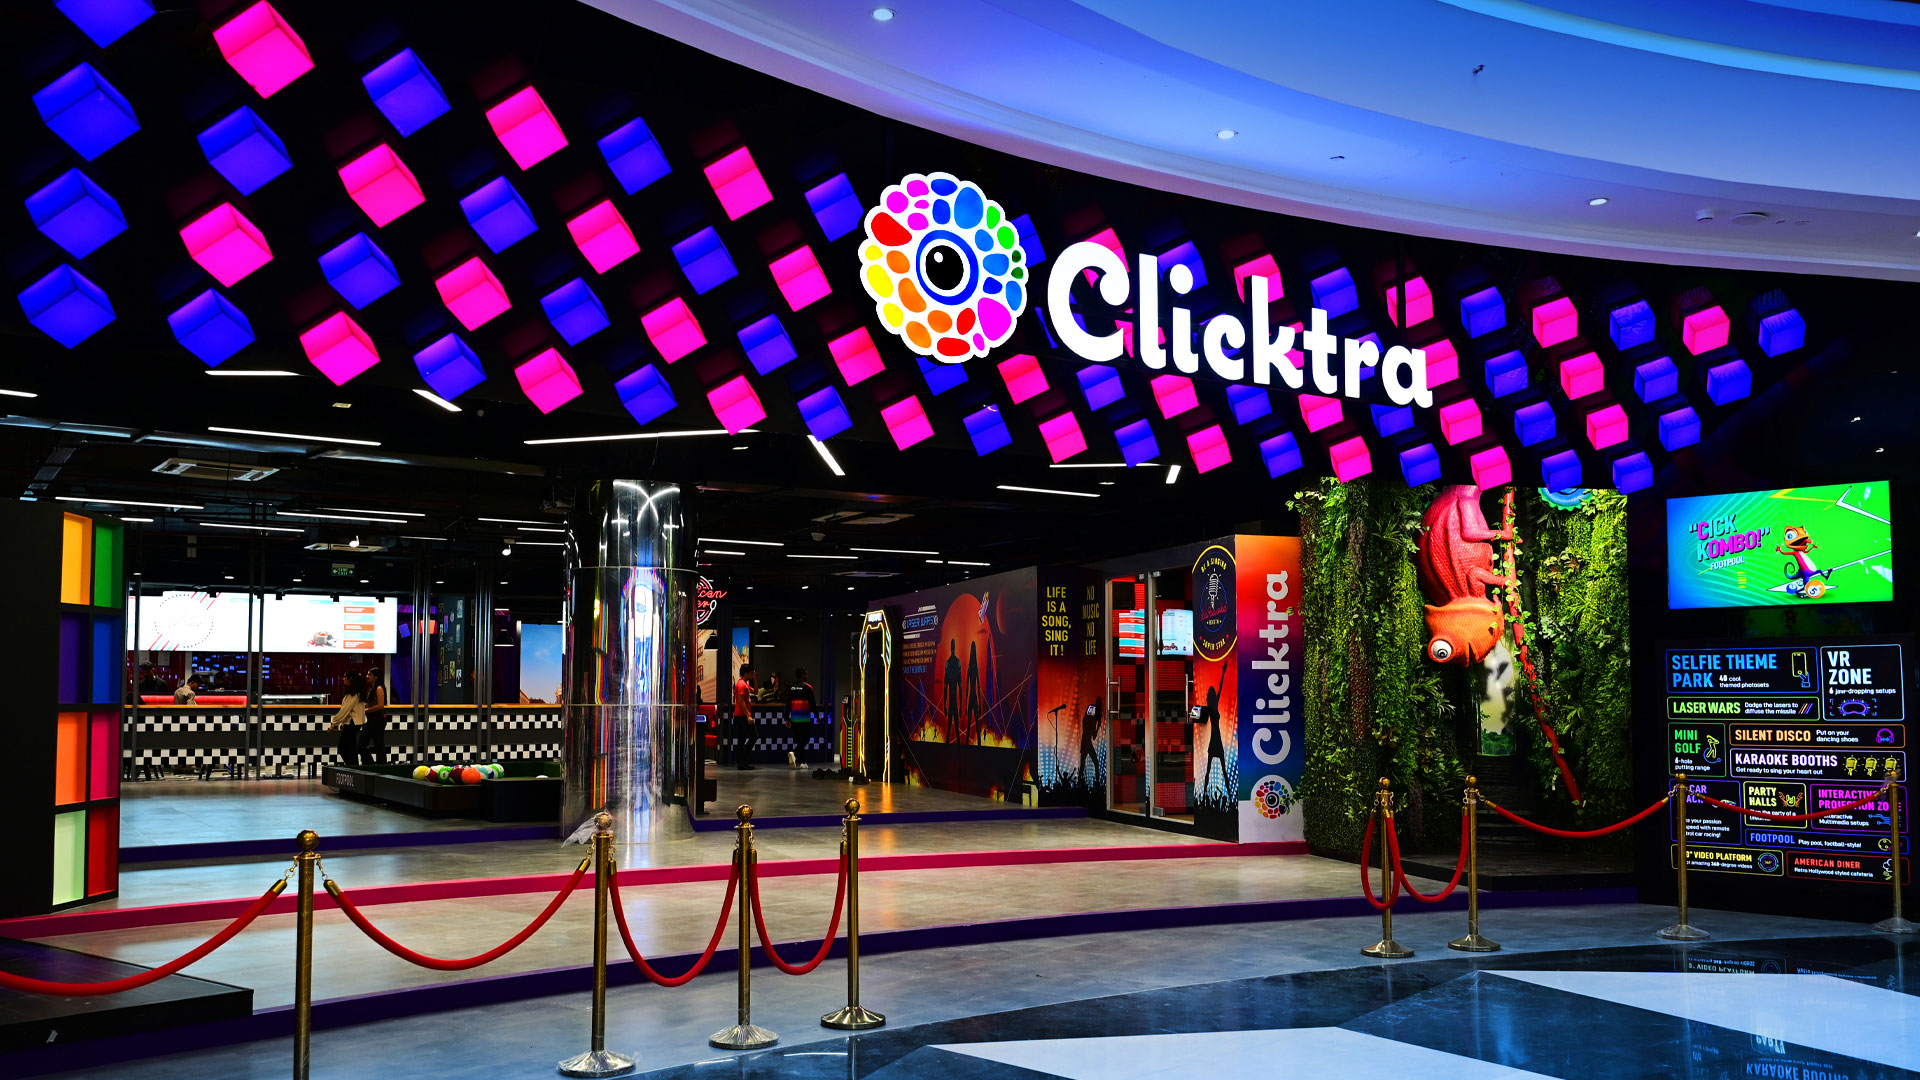 Get ready to have the time of your life at Clicktra.